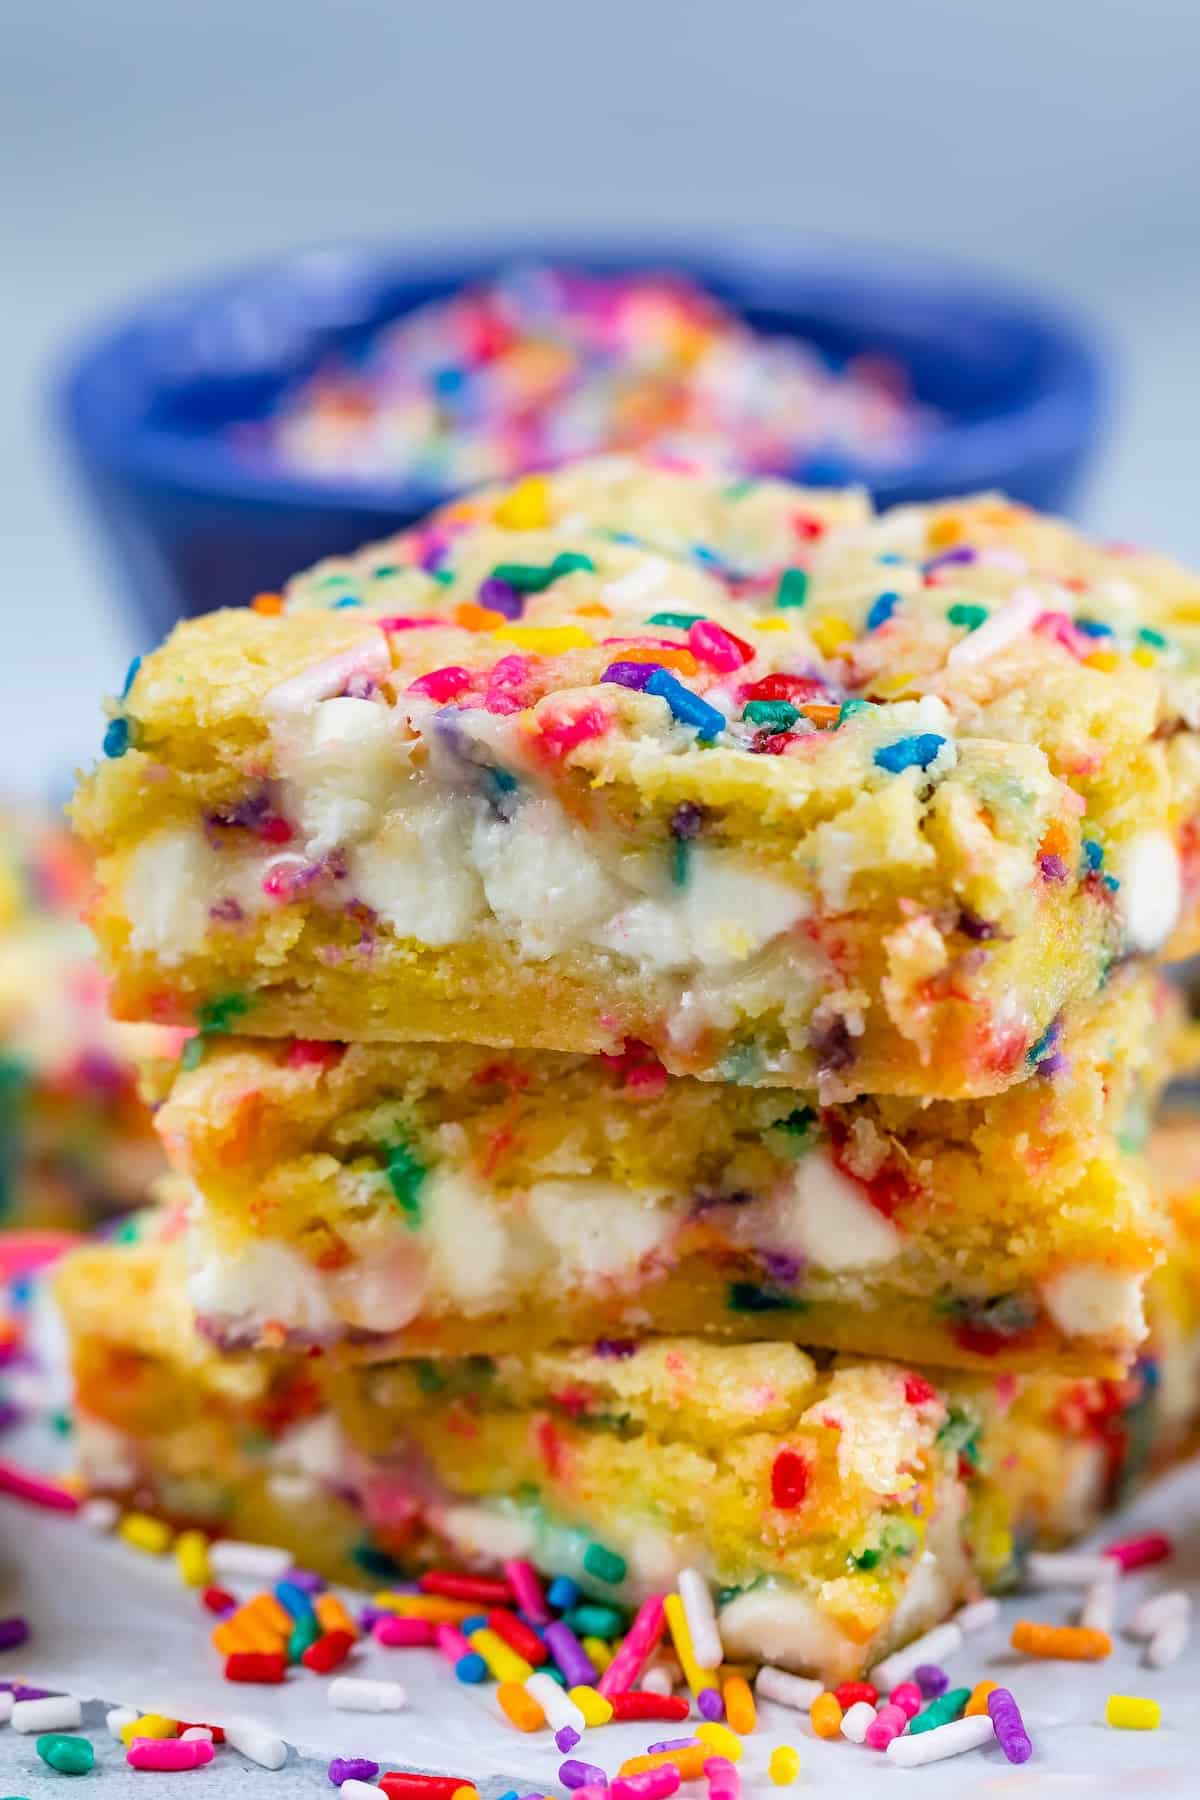 stacked funfetti bars with white chocolate chips and colorful sprinkles baked in.